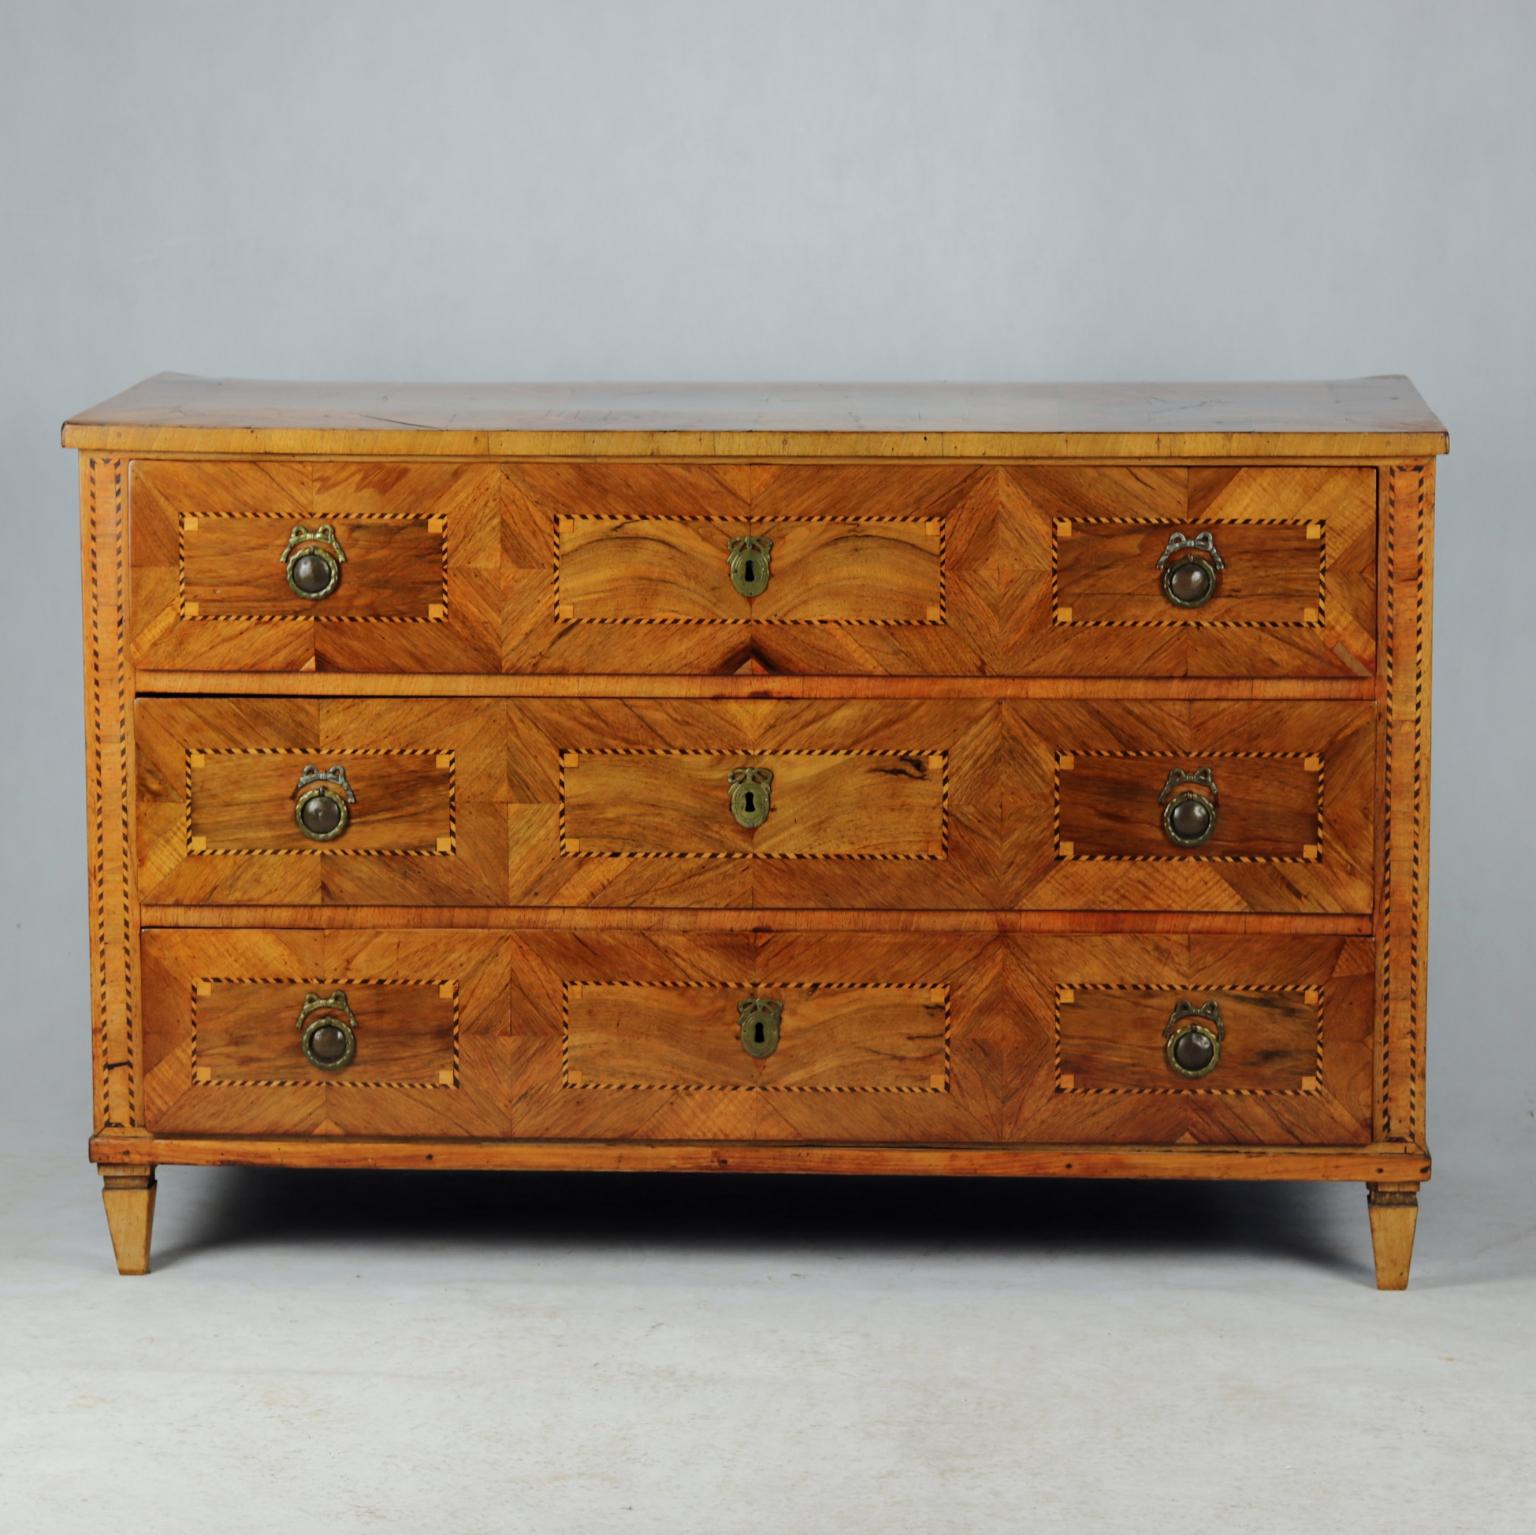 This German chest of drawers was built around 1800 in Germany. The body of the chest is made of pine wood and reworked veneered with walnut. The upper is decorated with a beautiful strip. The body with three drawers is decorated with edging and